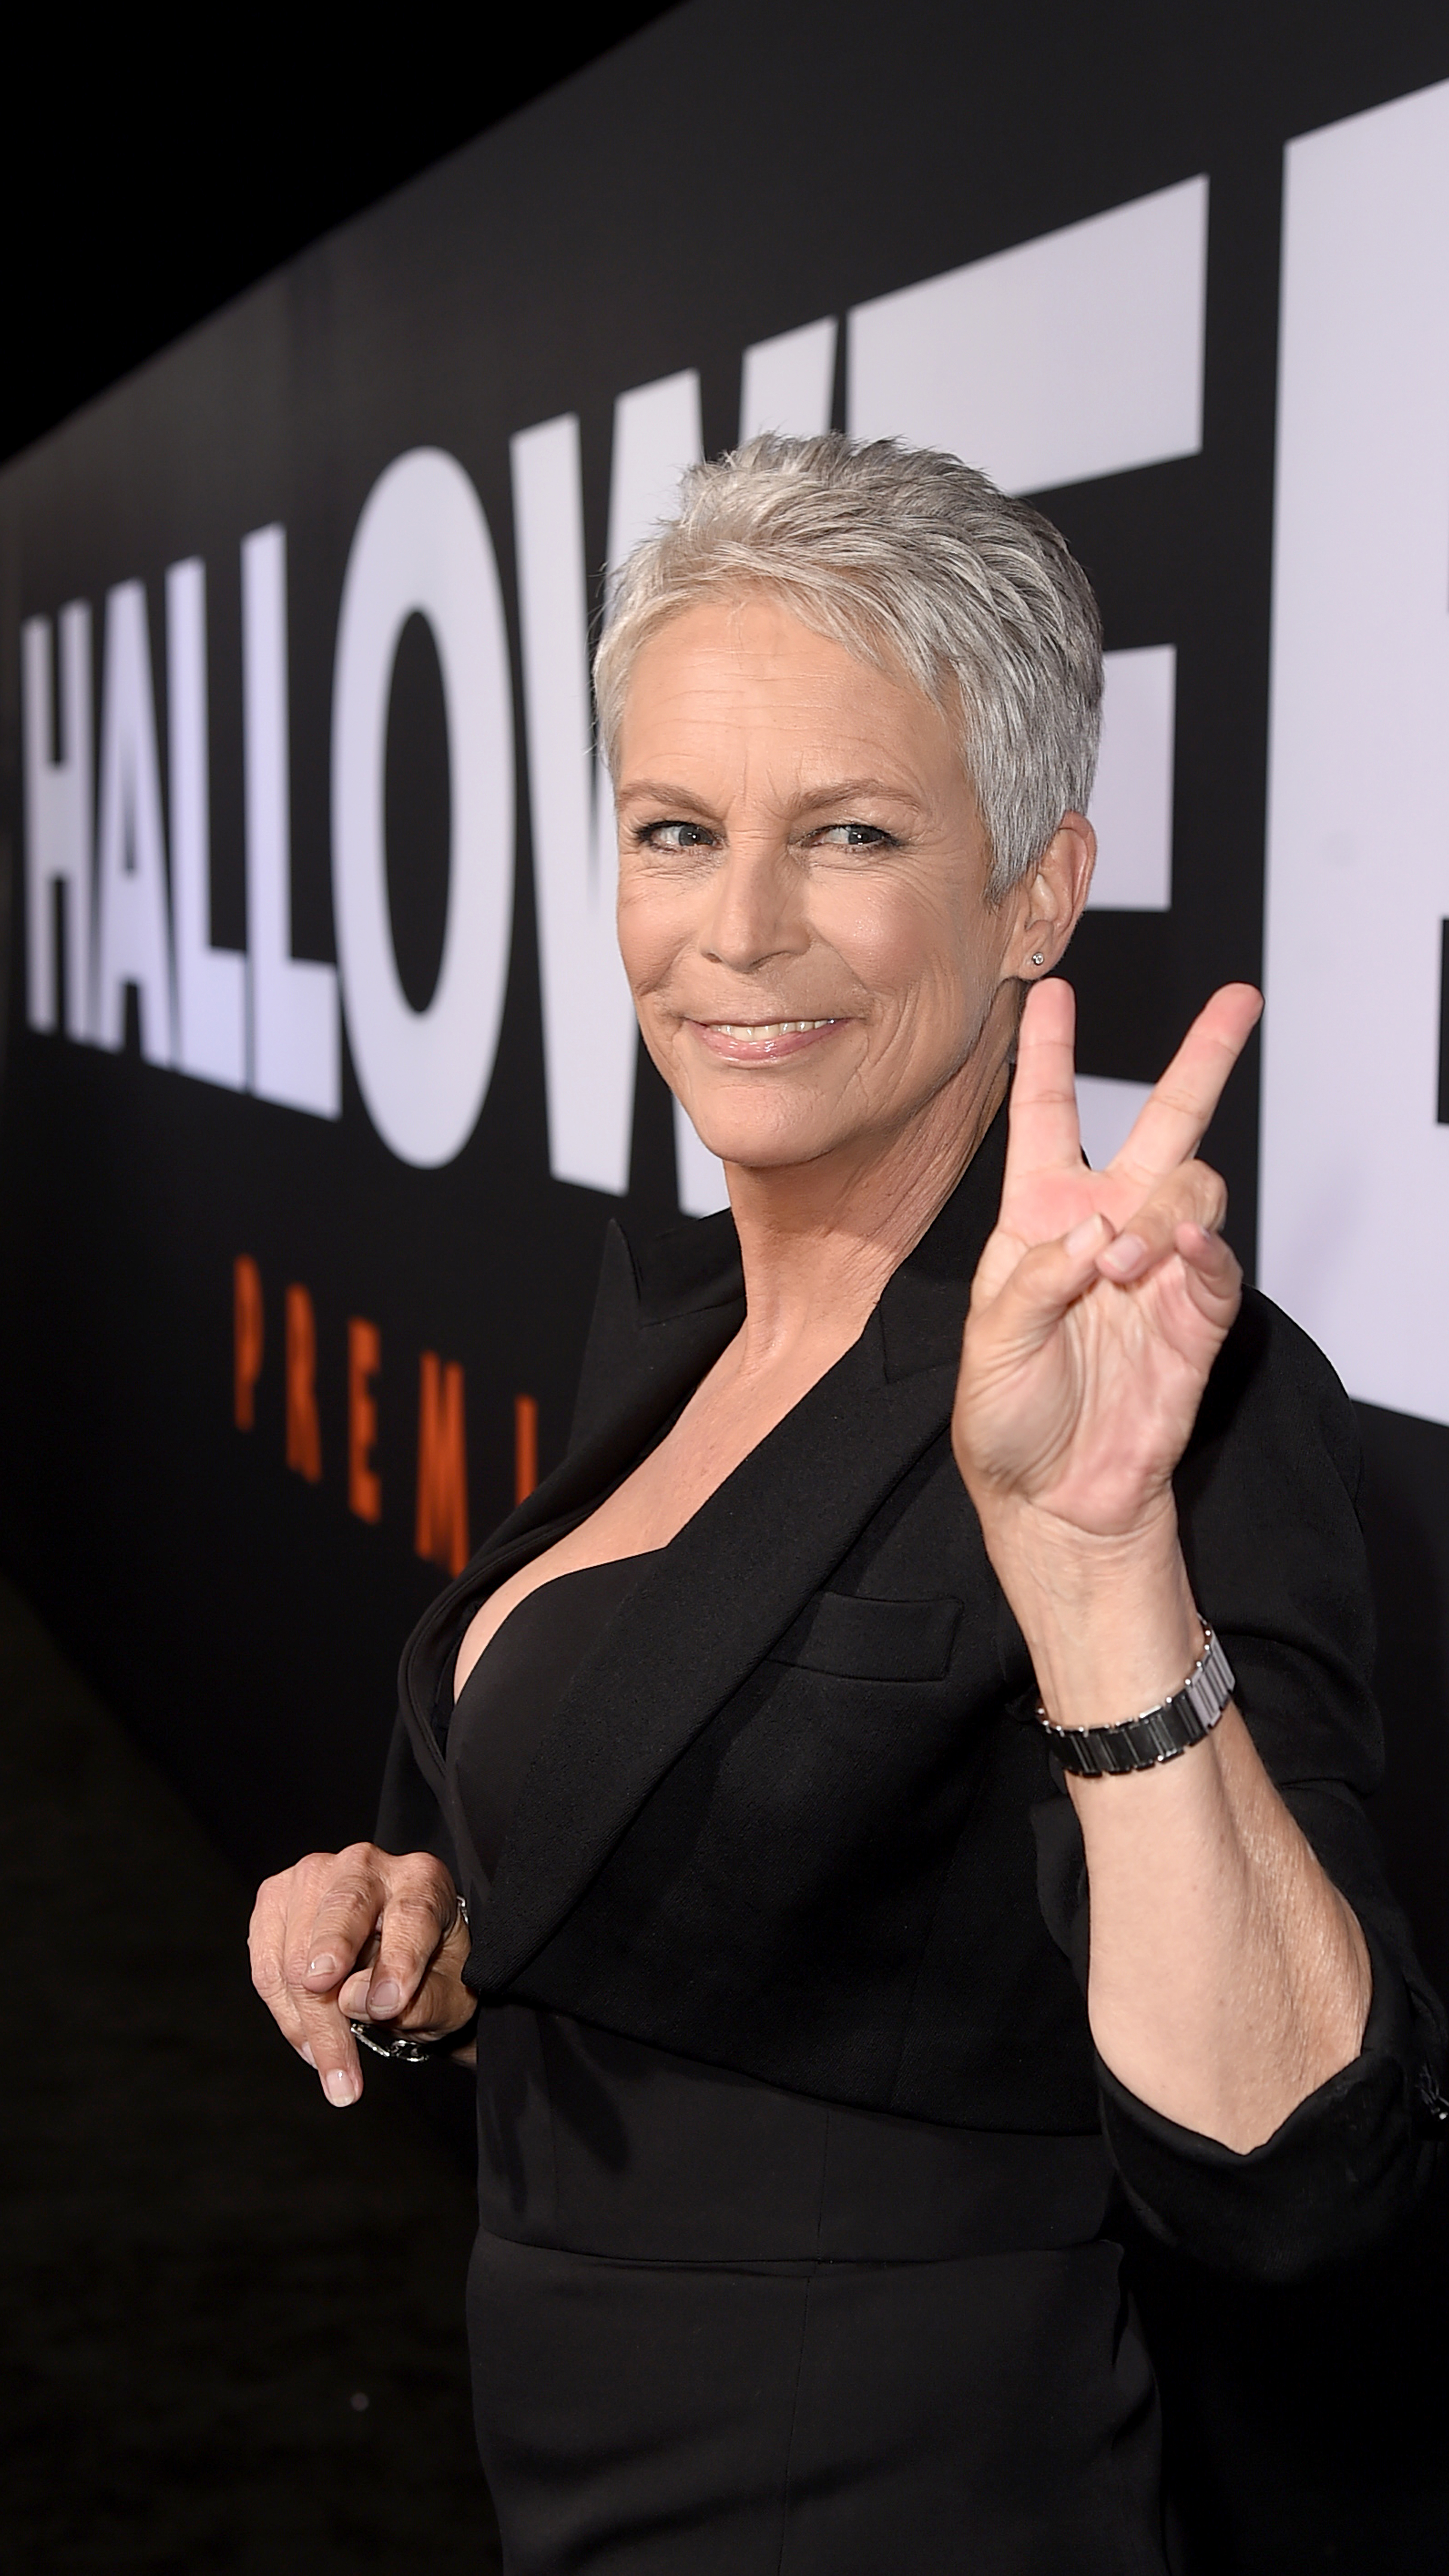 Jamie Lee Curtis attends the Universal Pictures' "Halloween" premiere at TCL Chinese Theatre on October 17, 2018 in Hollywood, California. | Source: Getty Images